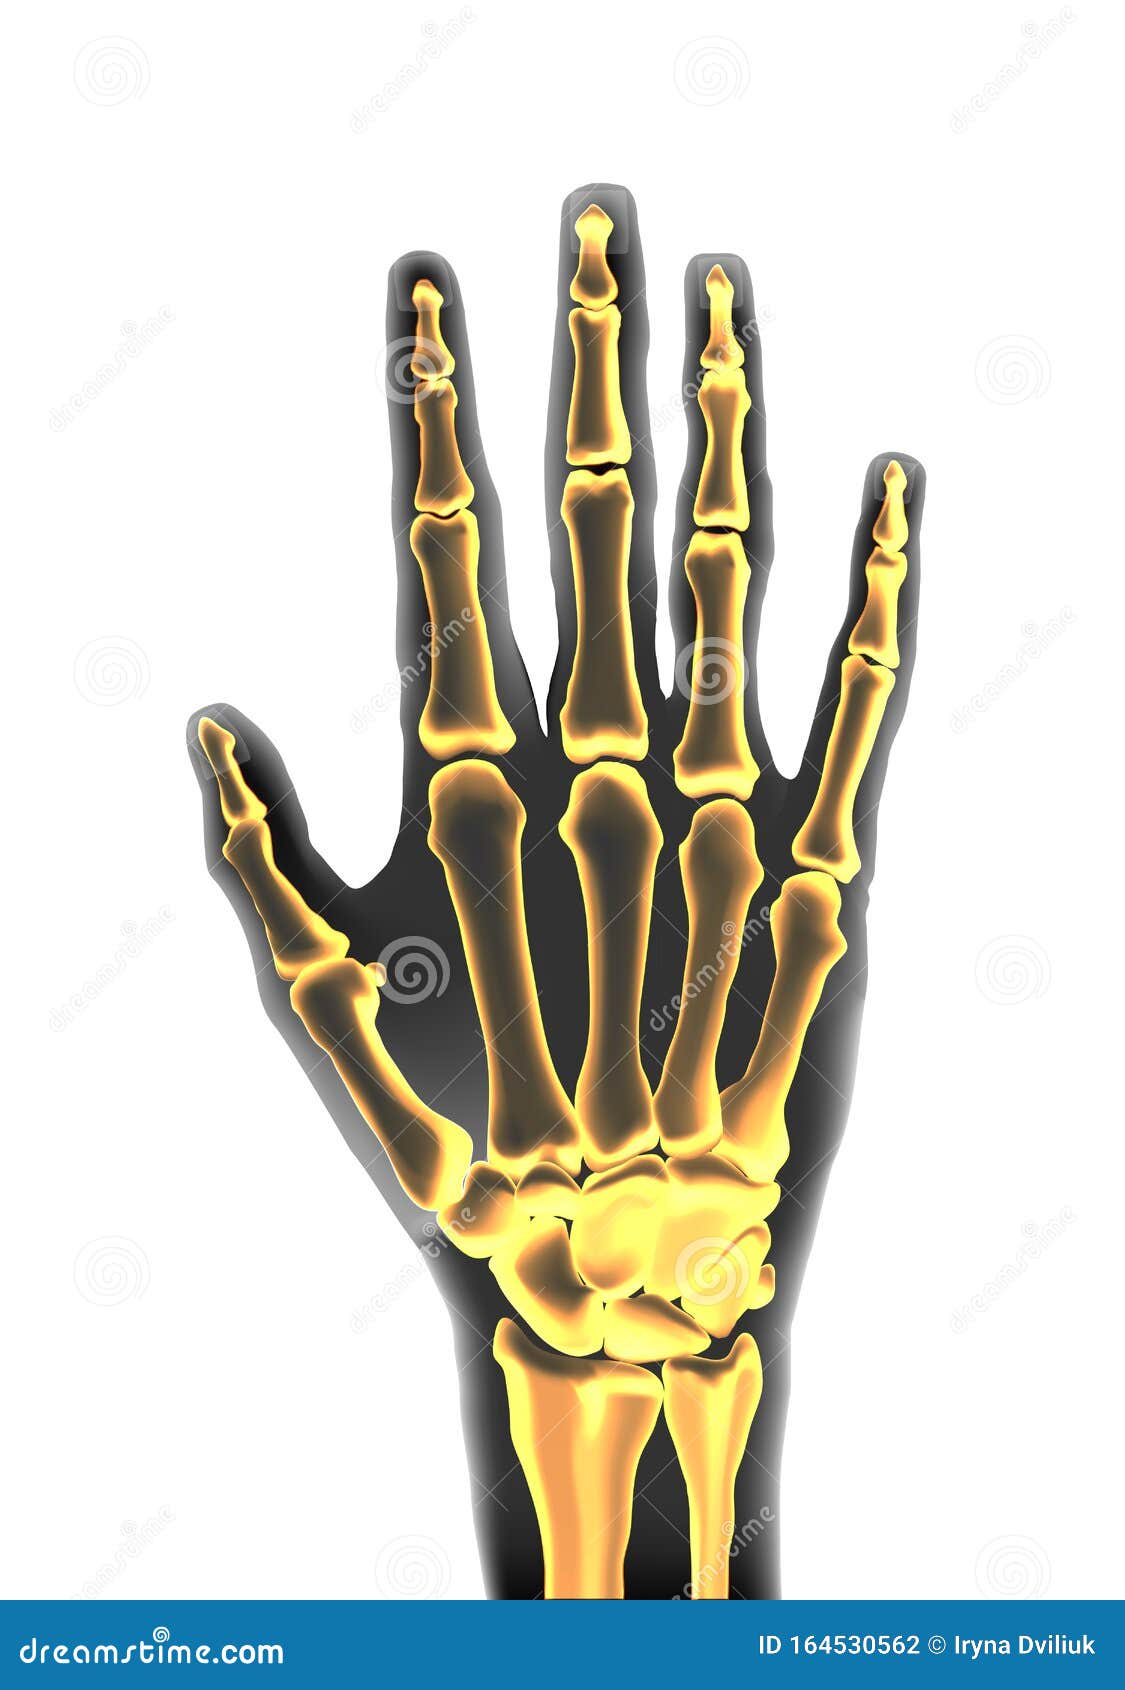 realistic black and yellow transparente human hand skeleton